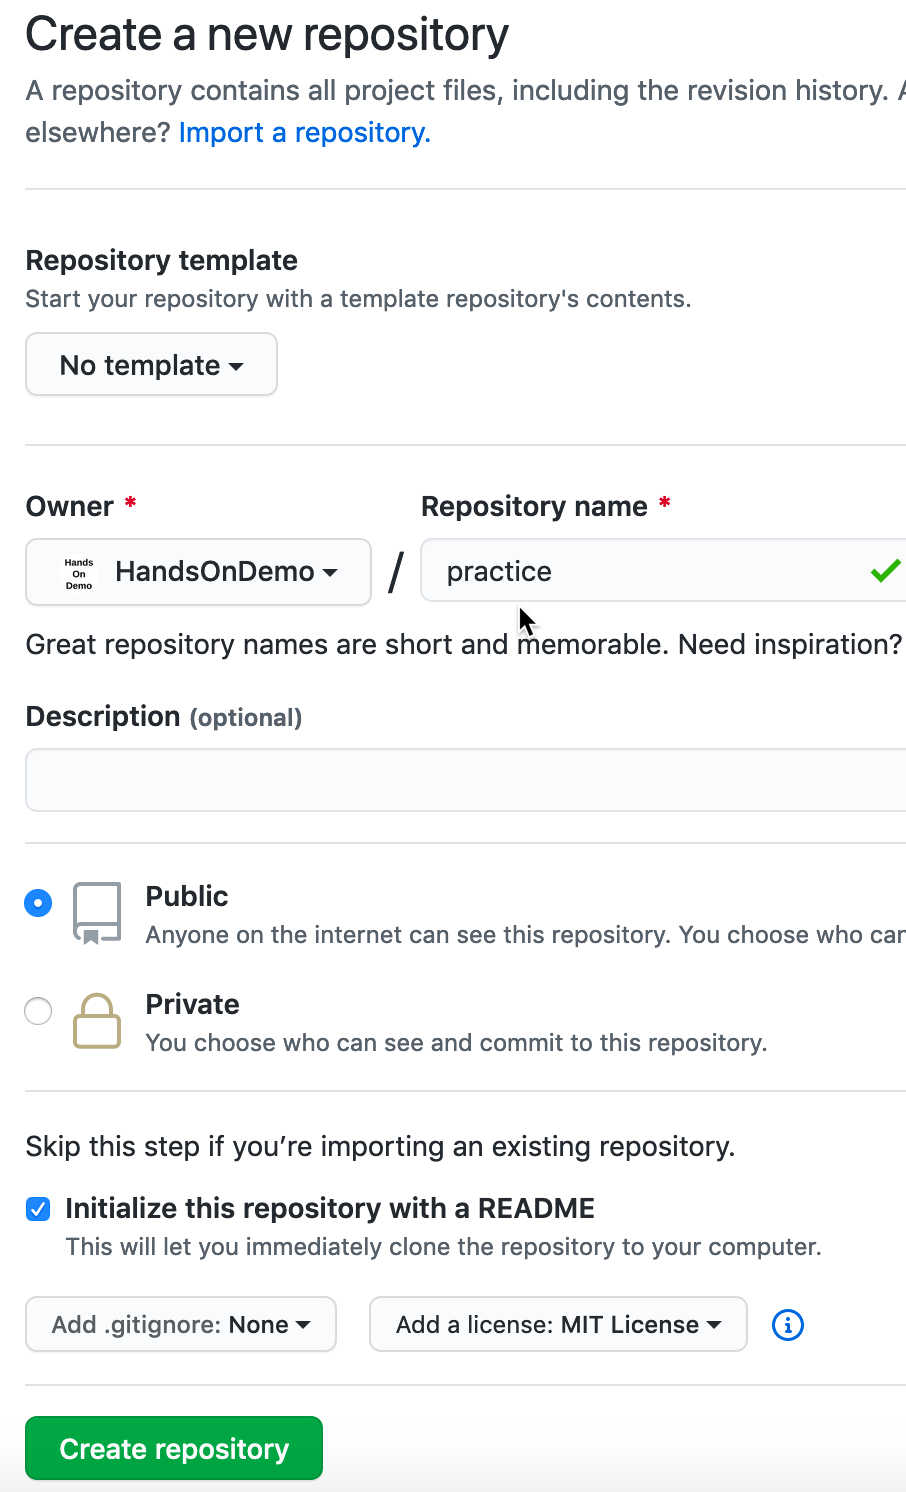 Name your new repo practice, check the box to Initialize this repo with a README, and Add a license (select MIT) to match any code you plan to upload.